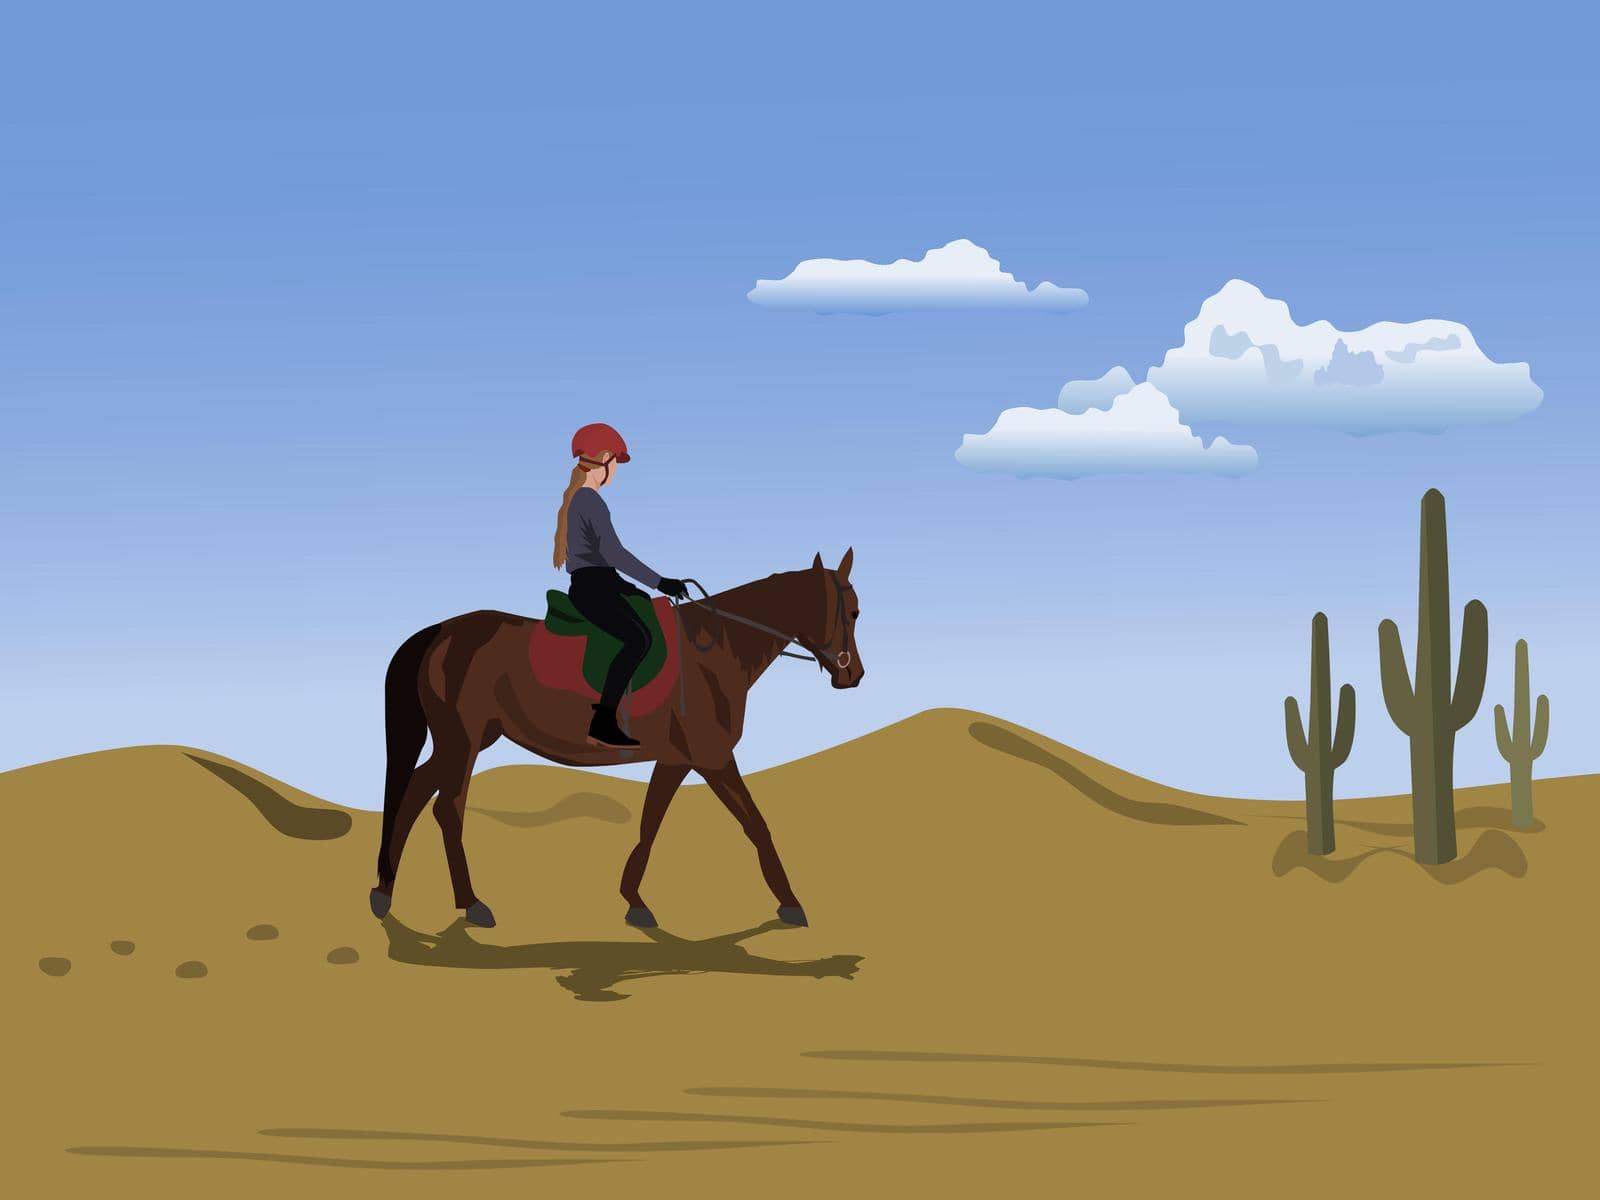 A woman riding a horse in the desert with sky and clouds in the background.